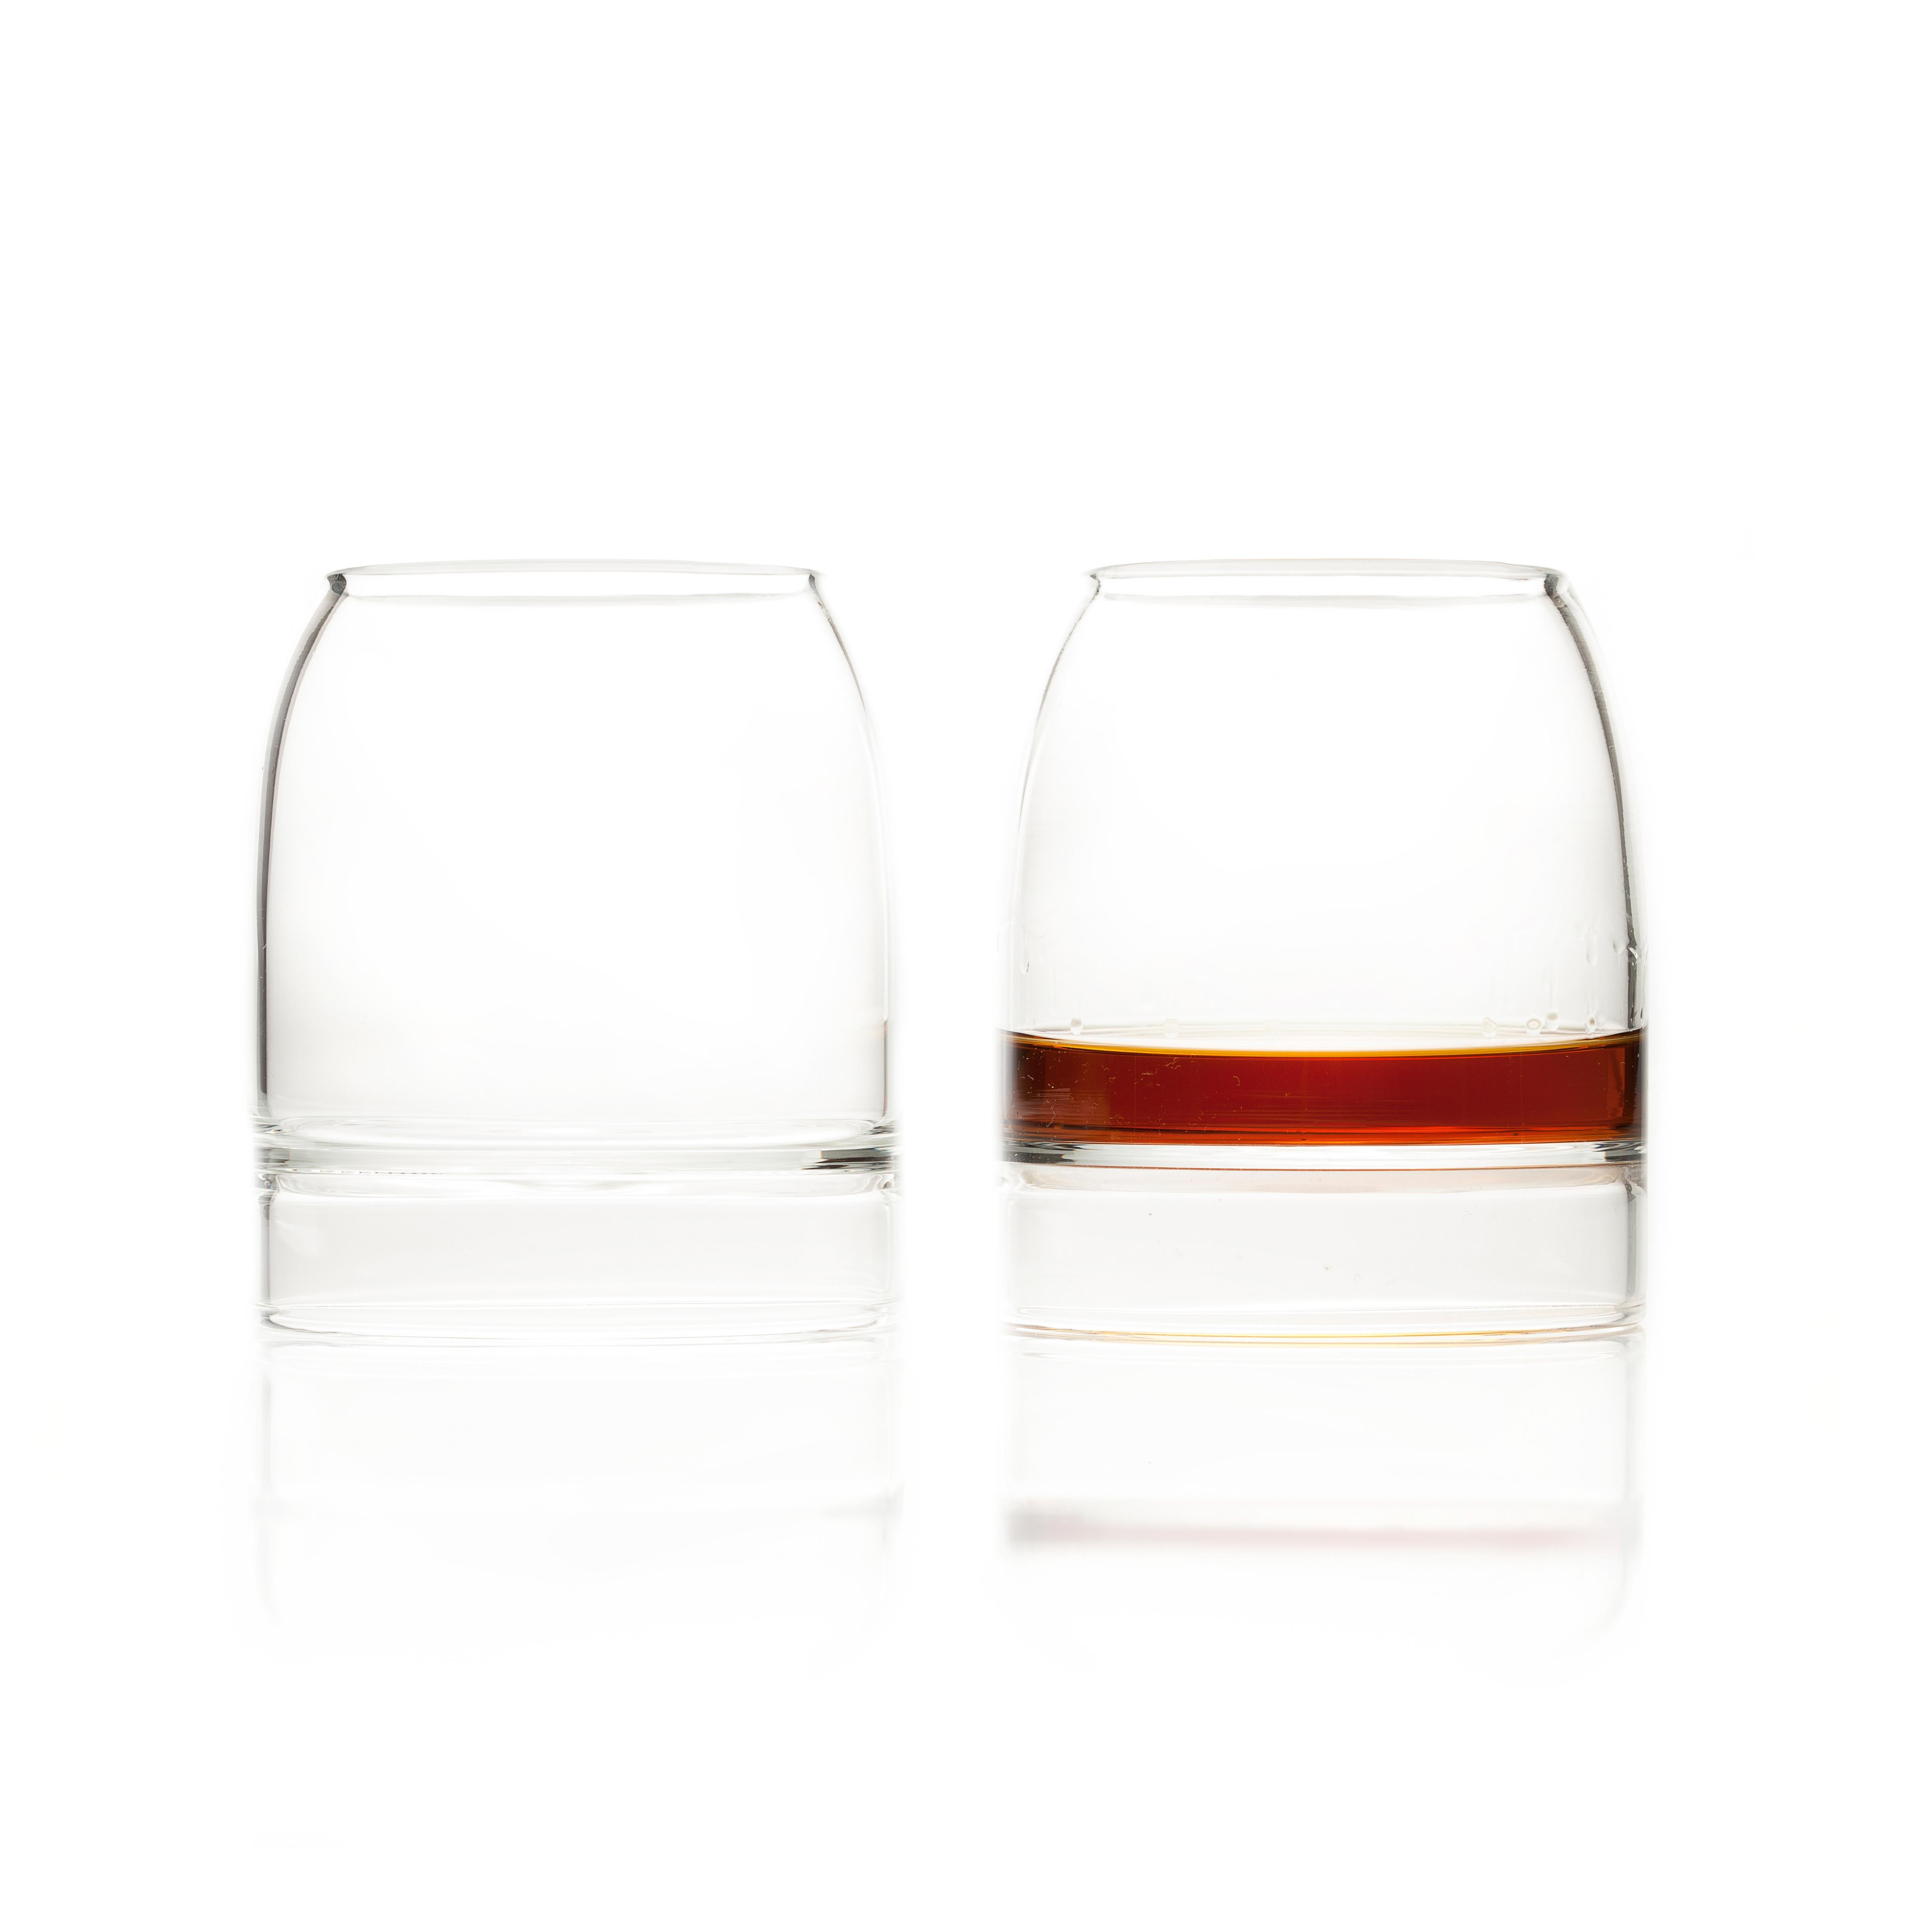 RARE WHISKEY GLASS - set of two

The Rare Glass concentrates on presentation and experience. Commissioned by The Macallan for the launch of its Rare Cask Scotch, Rare is a technical glass designed to concentrate the aromas within its tapered walls.